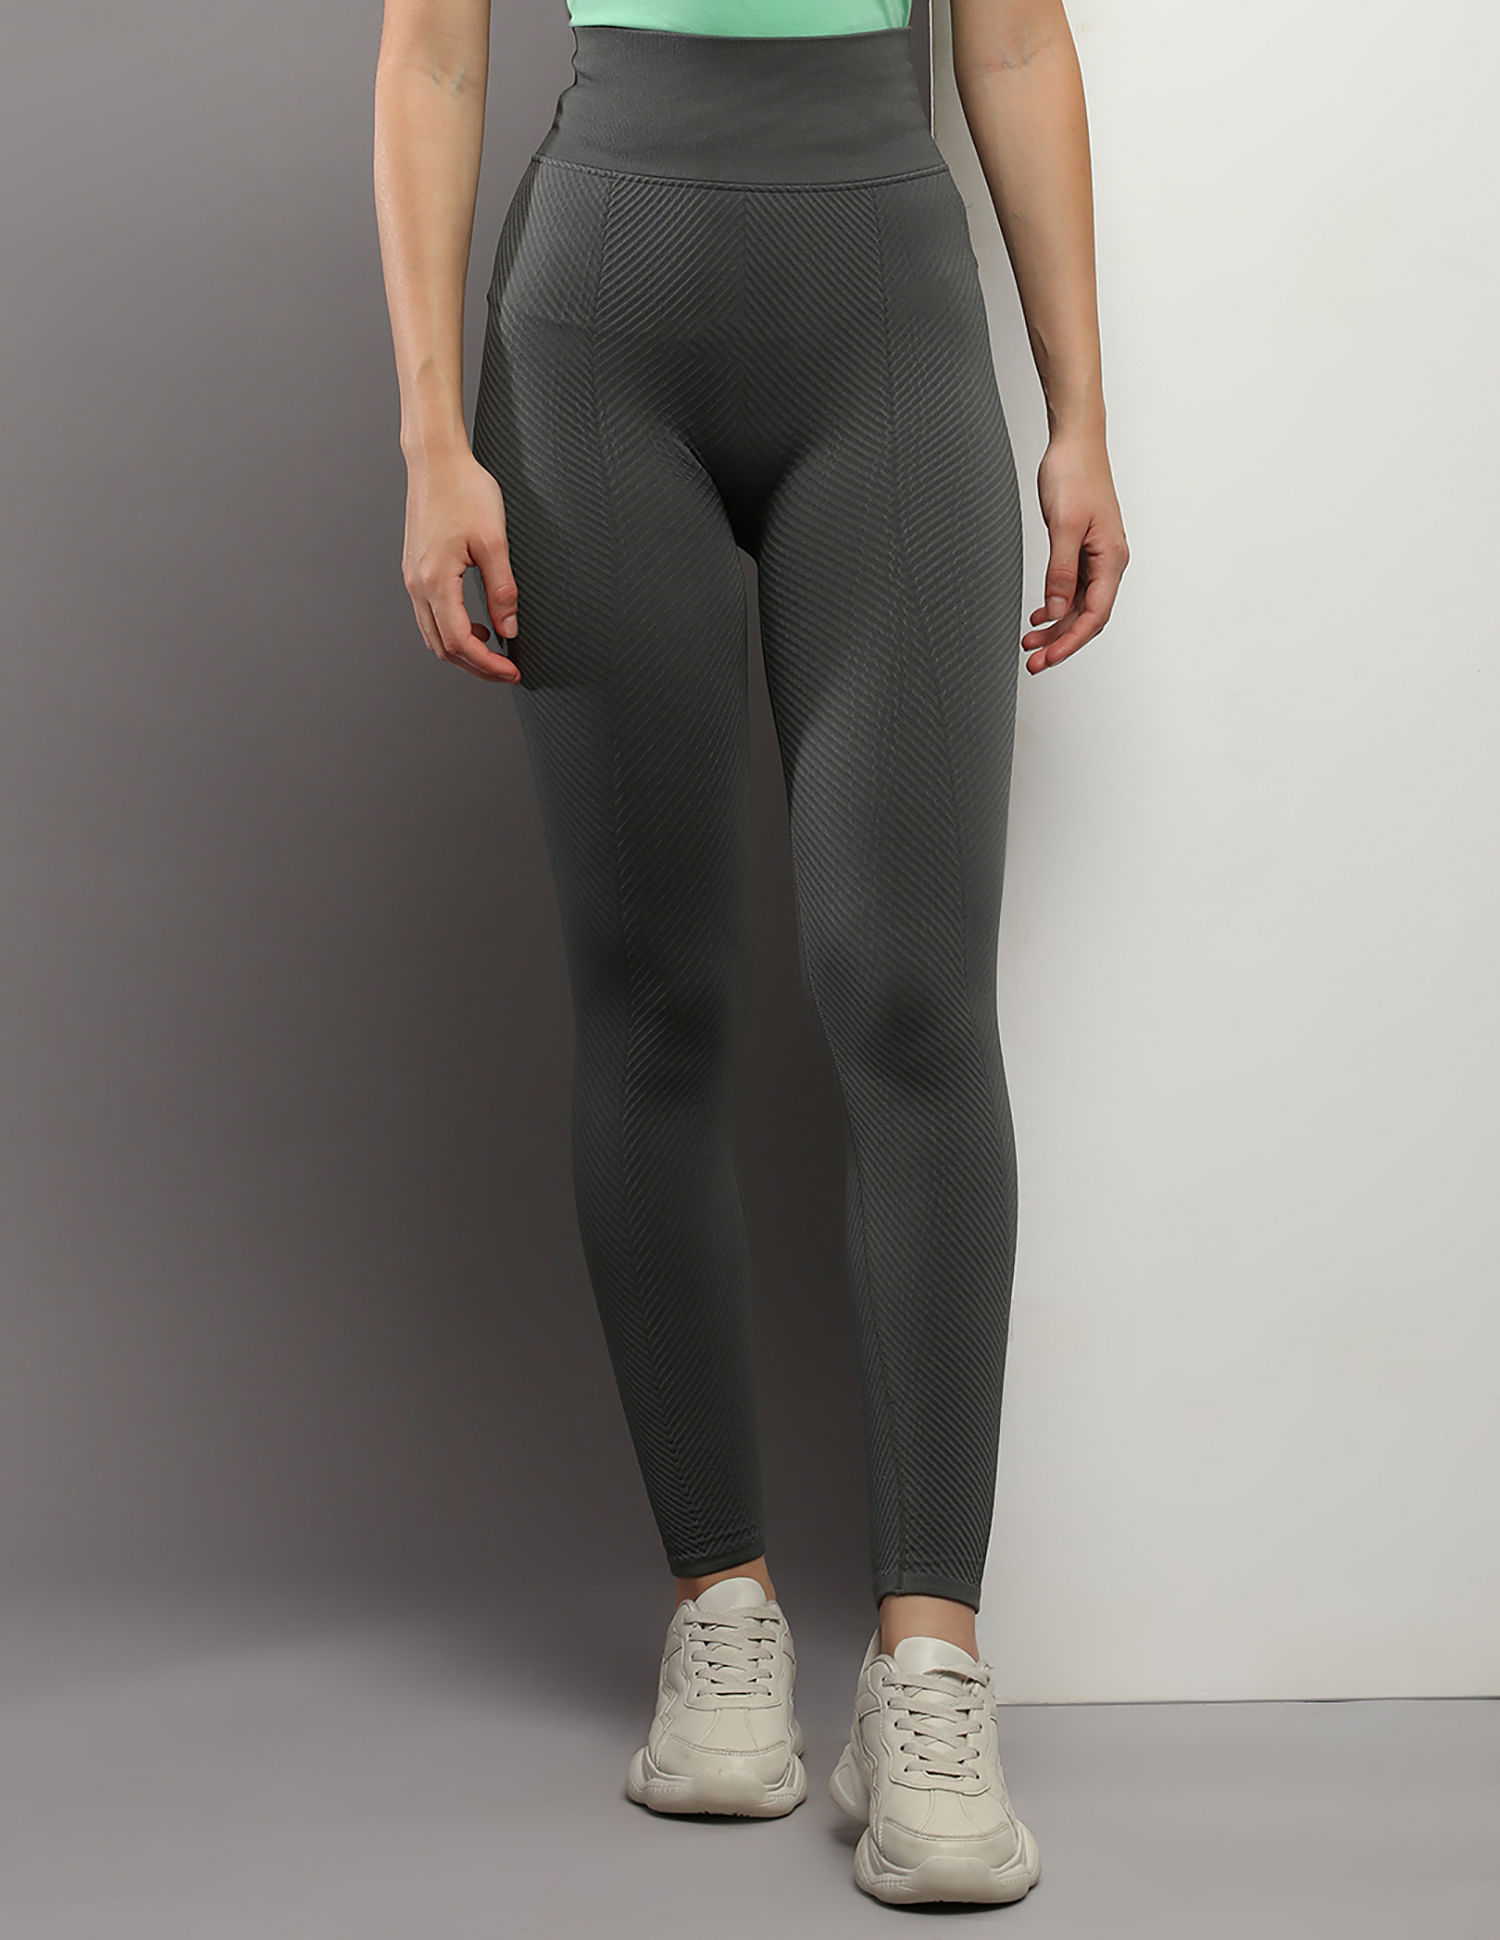 Calvin Klein Jeans Tights - Buy Calvin Klein Jeans Tights online in India